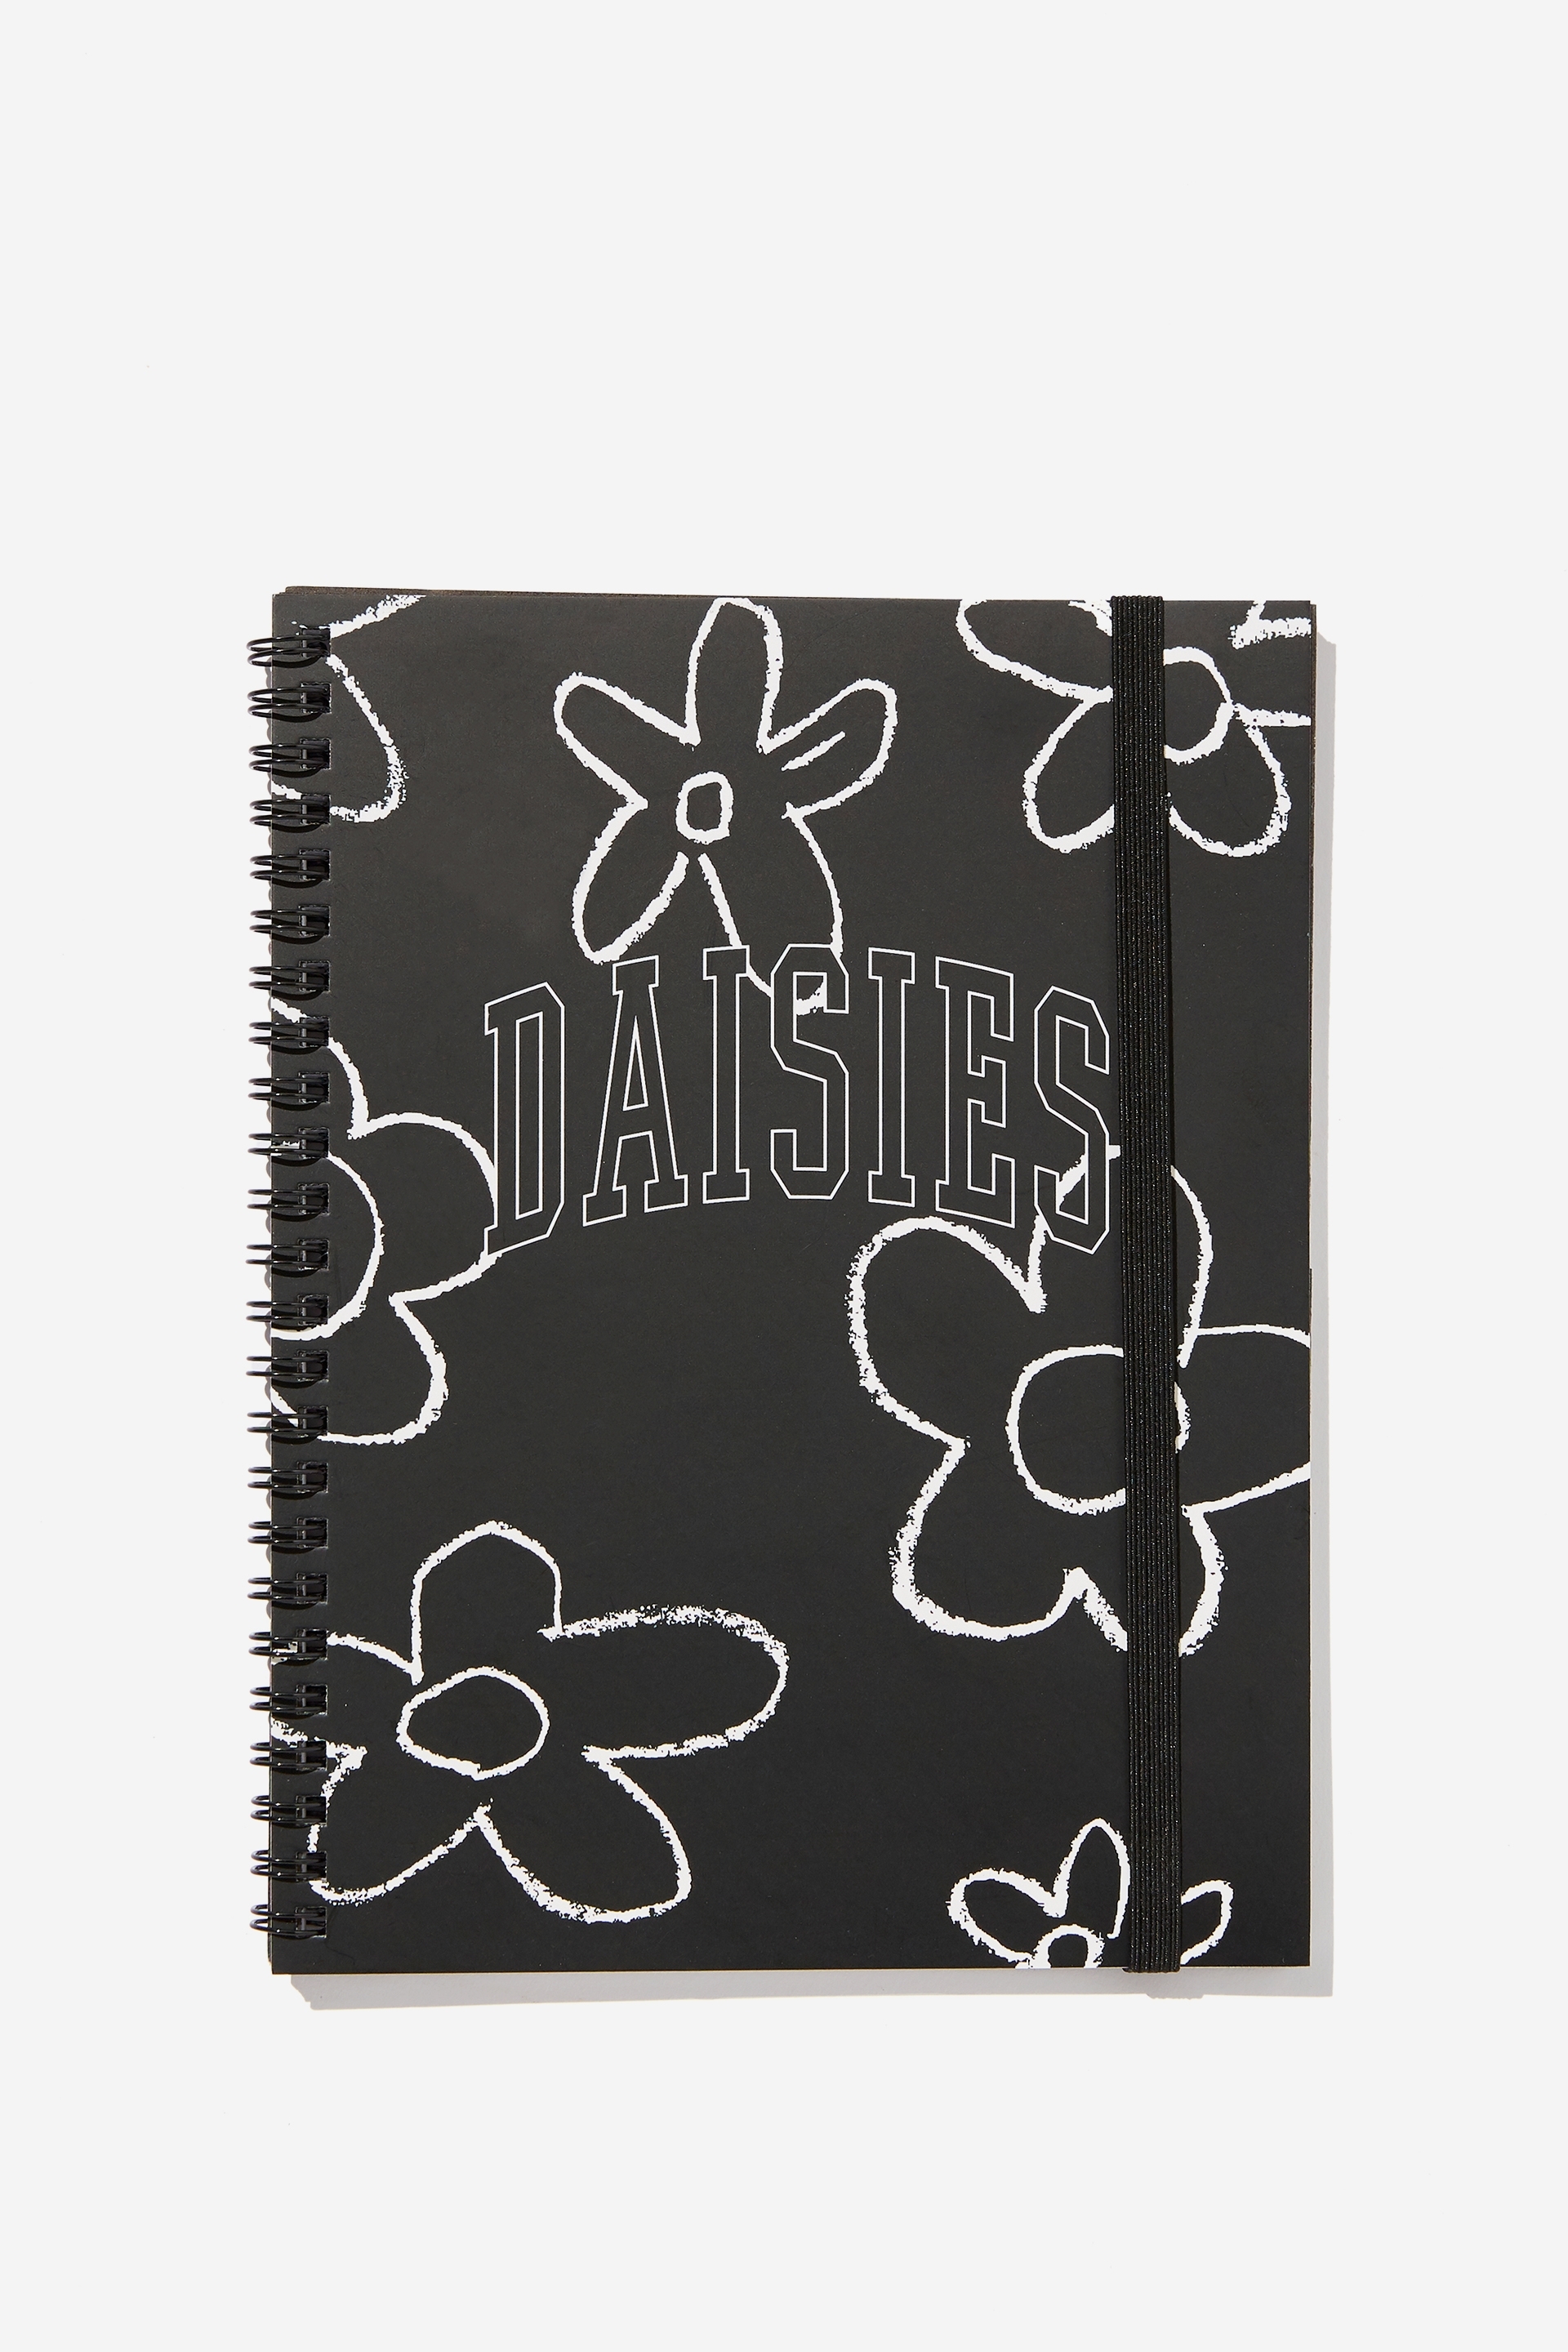 Typo - A5 Spinout Notebook Recycled - Keyline daisies black/white